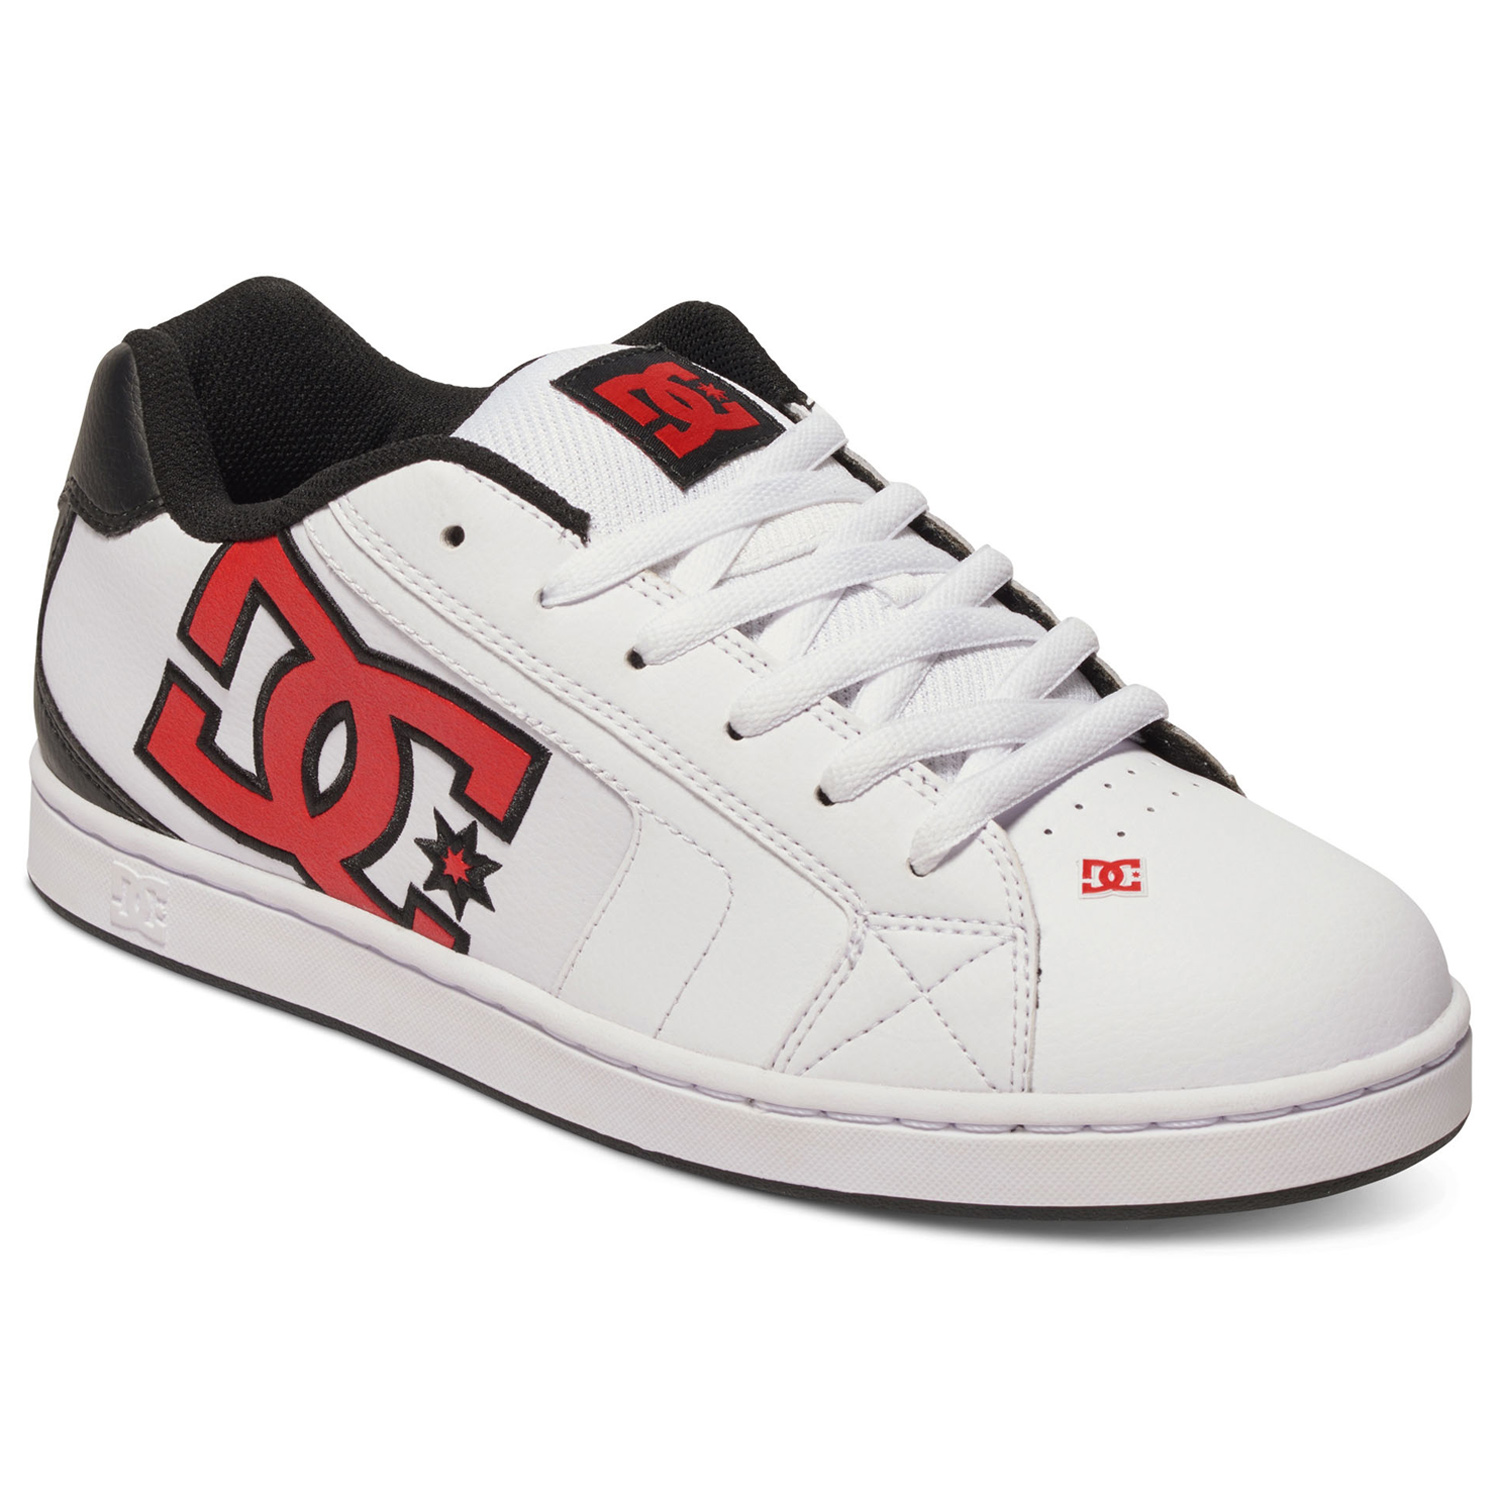 DC Shoes Net White/Athletic Red/Armor